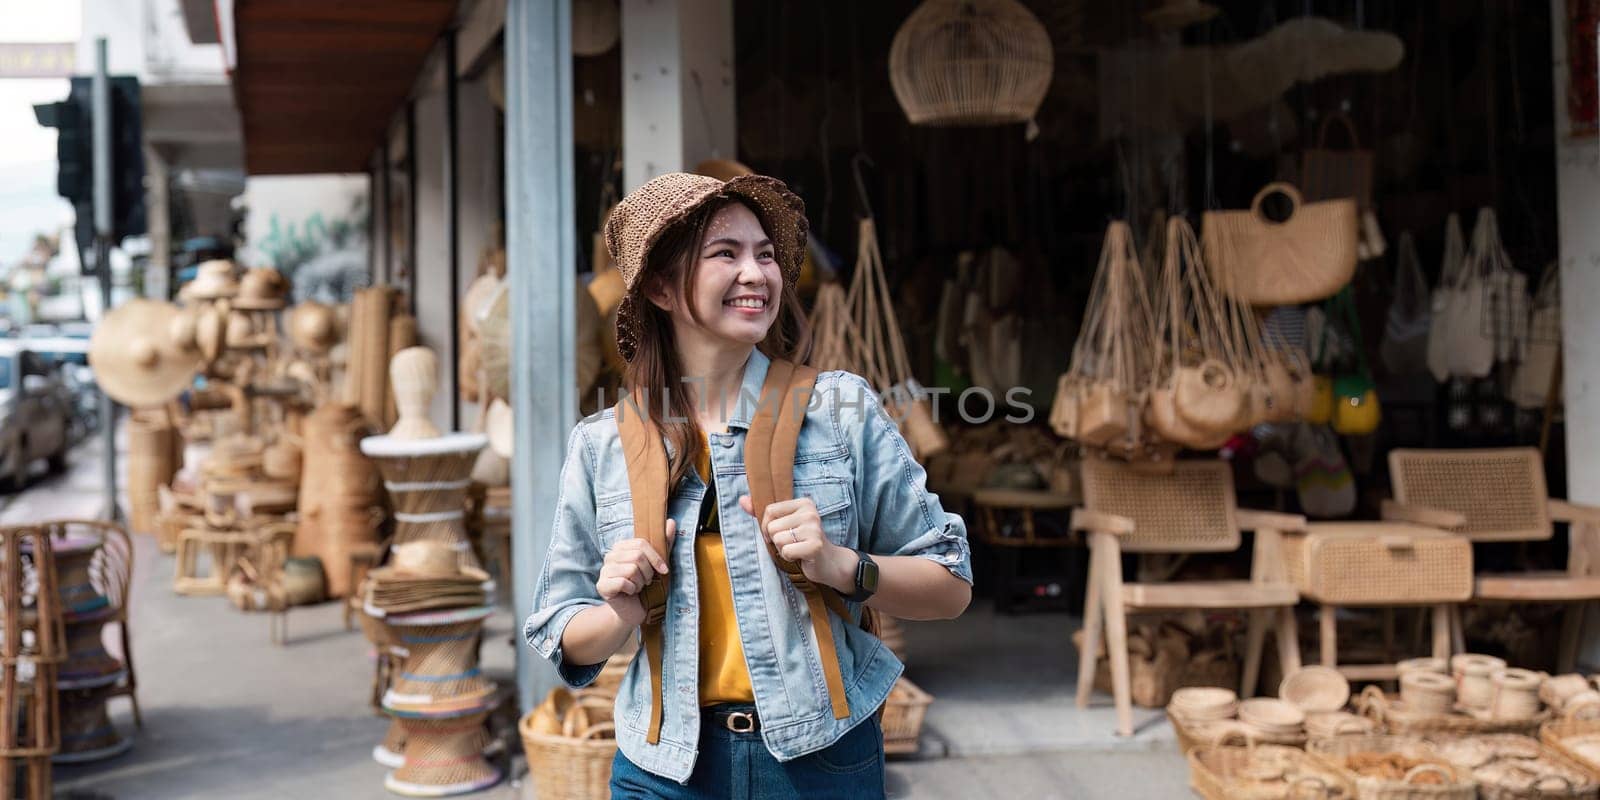 Young Woman Exploring Local Market in Urban Setting, Smiling Tourist with Backpack and Hat, Discovering Handmade Crafts and Souvenirs, Vibrant Street Scene, Travel and Adventure Concept by itchaznong